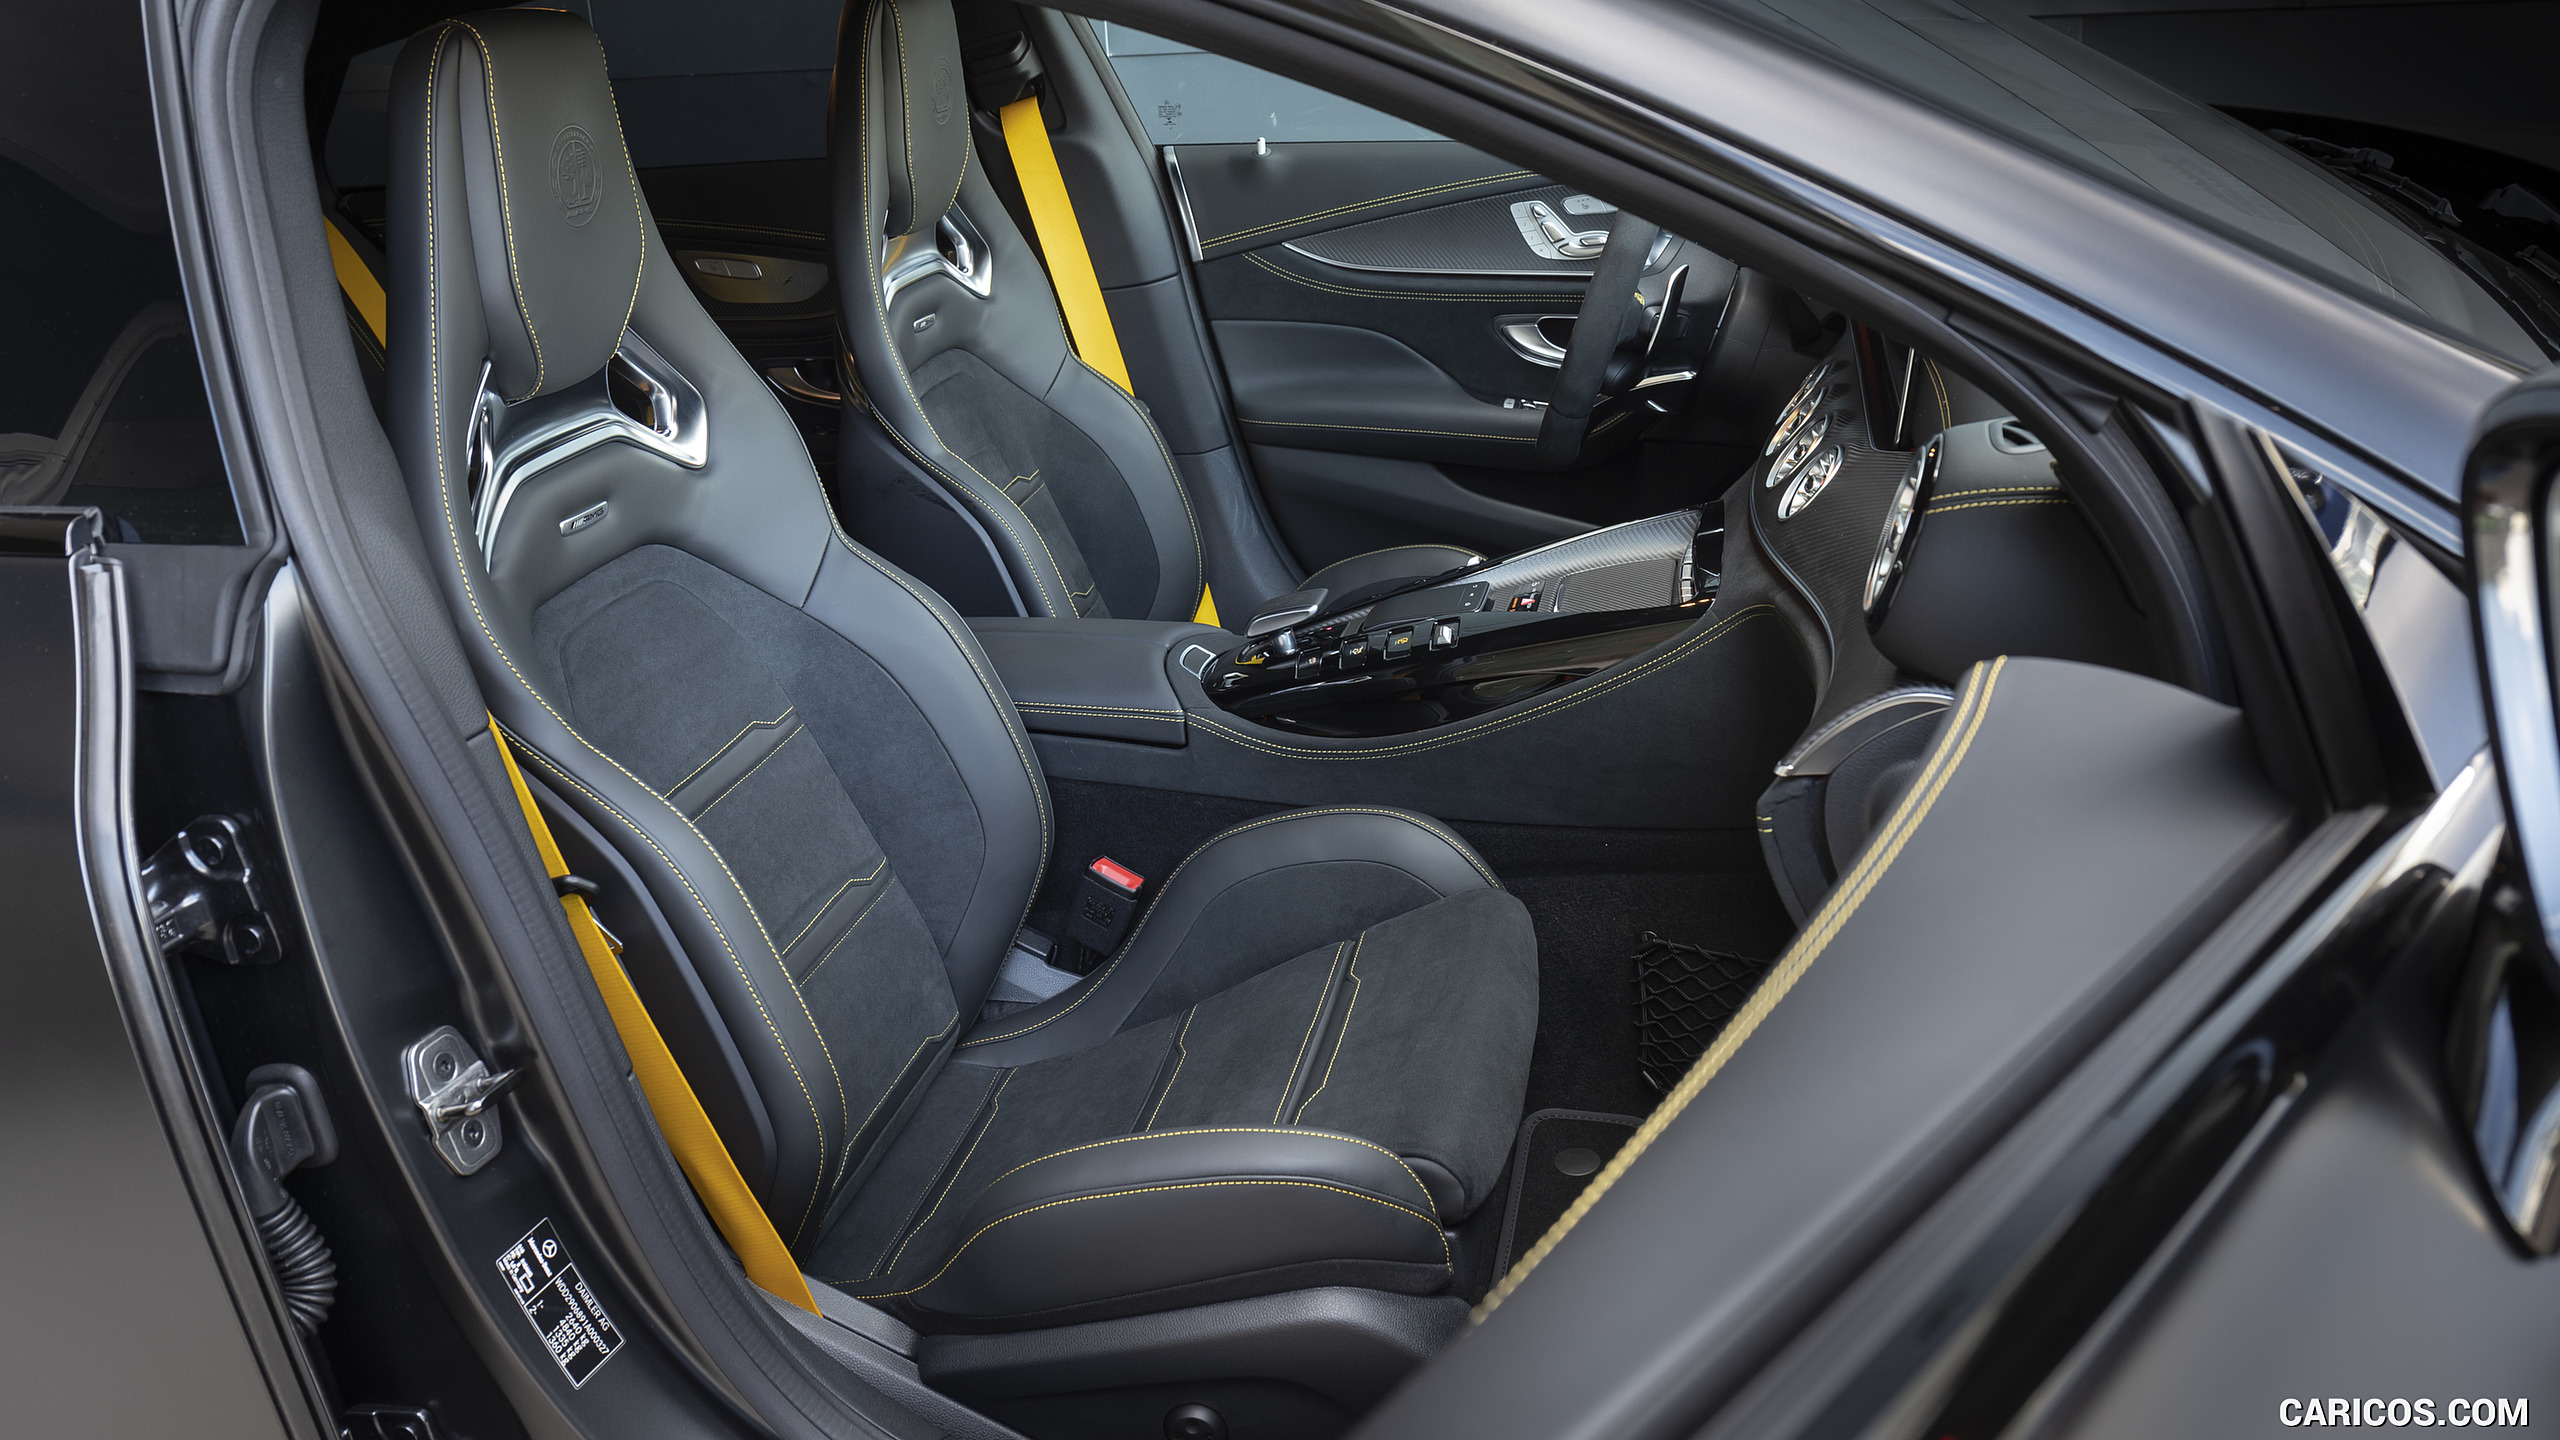 2019 Mercedes-AMG GT 63 S 4MATIC+ 4-Door Coupe - Interior, Front Seats, #235 of 427